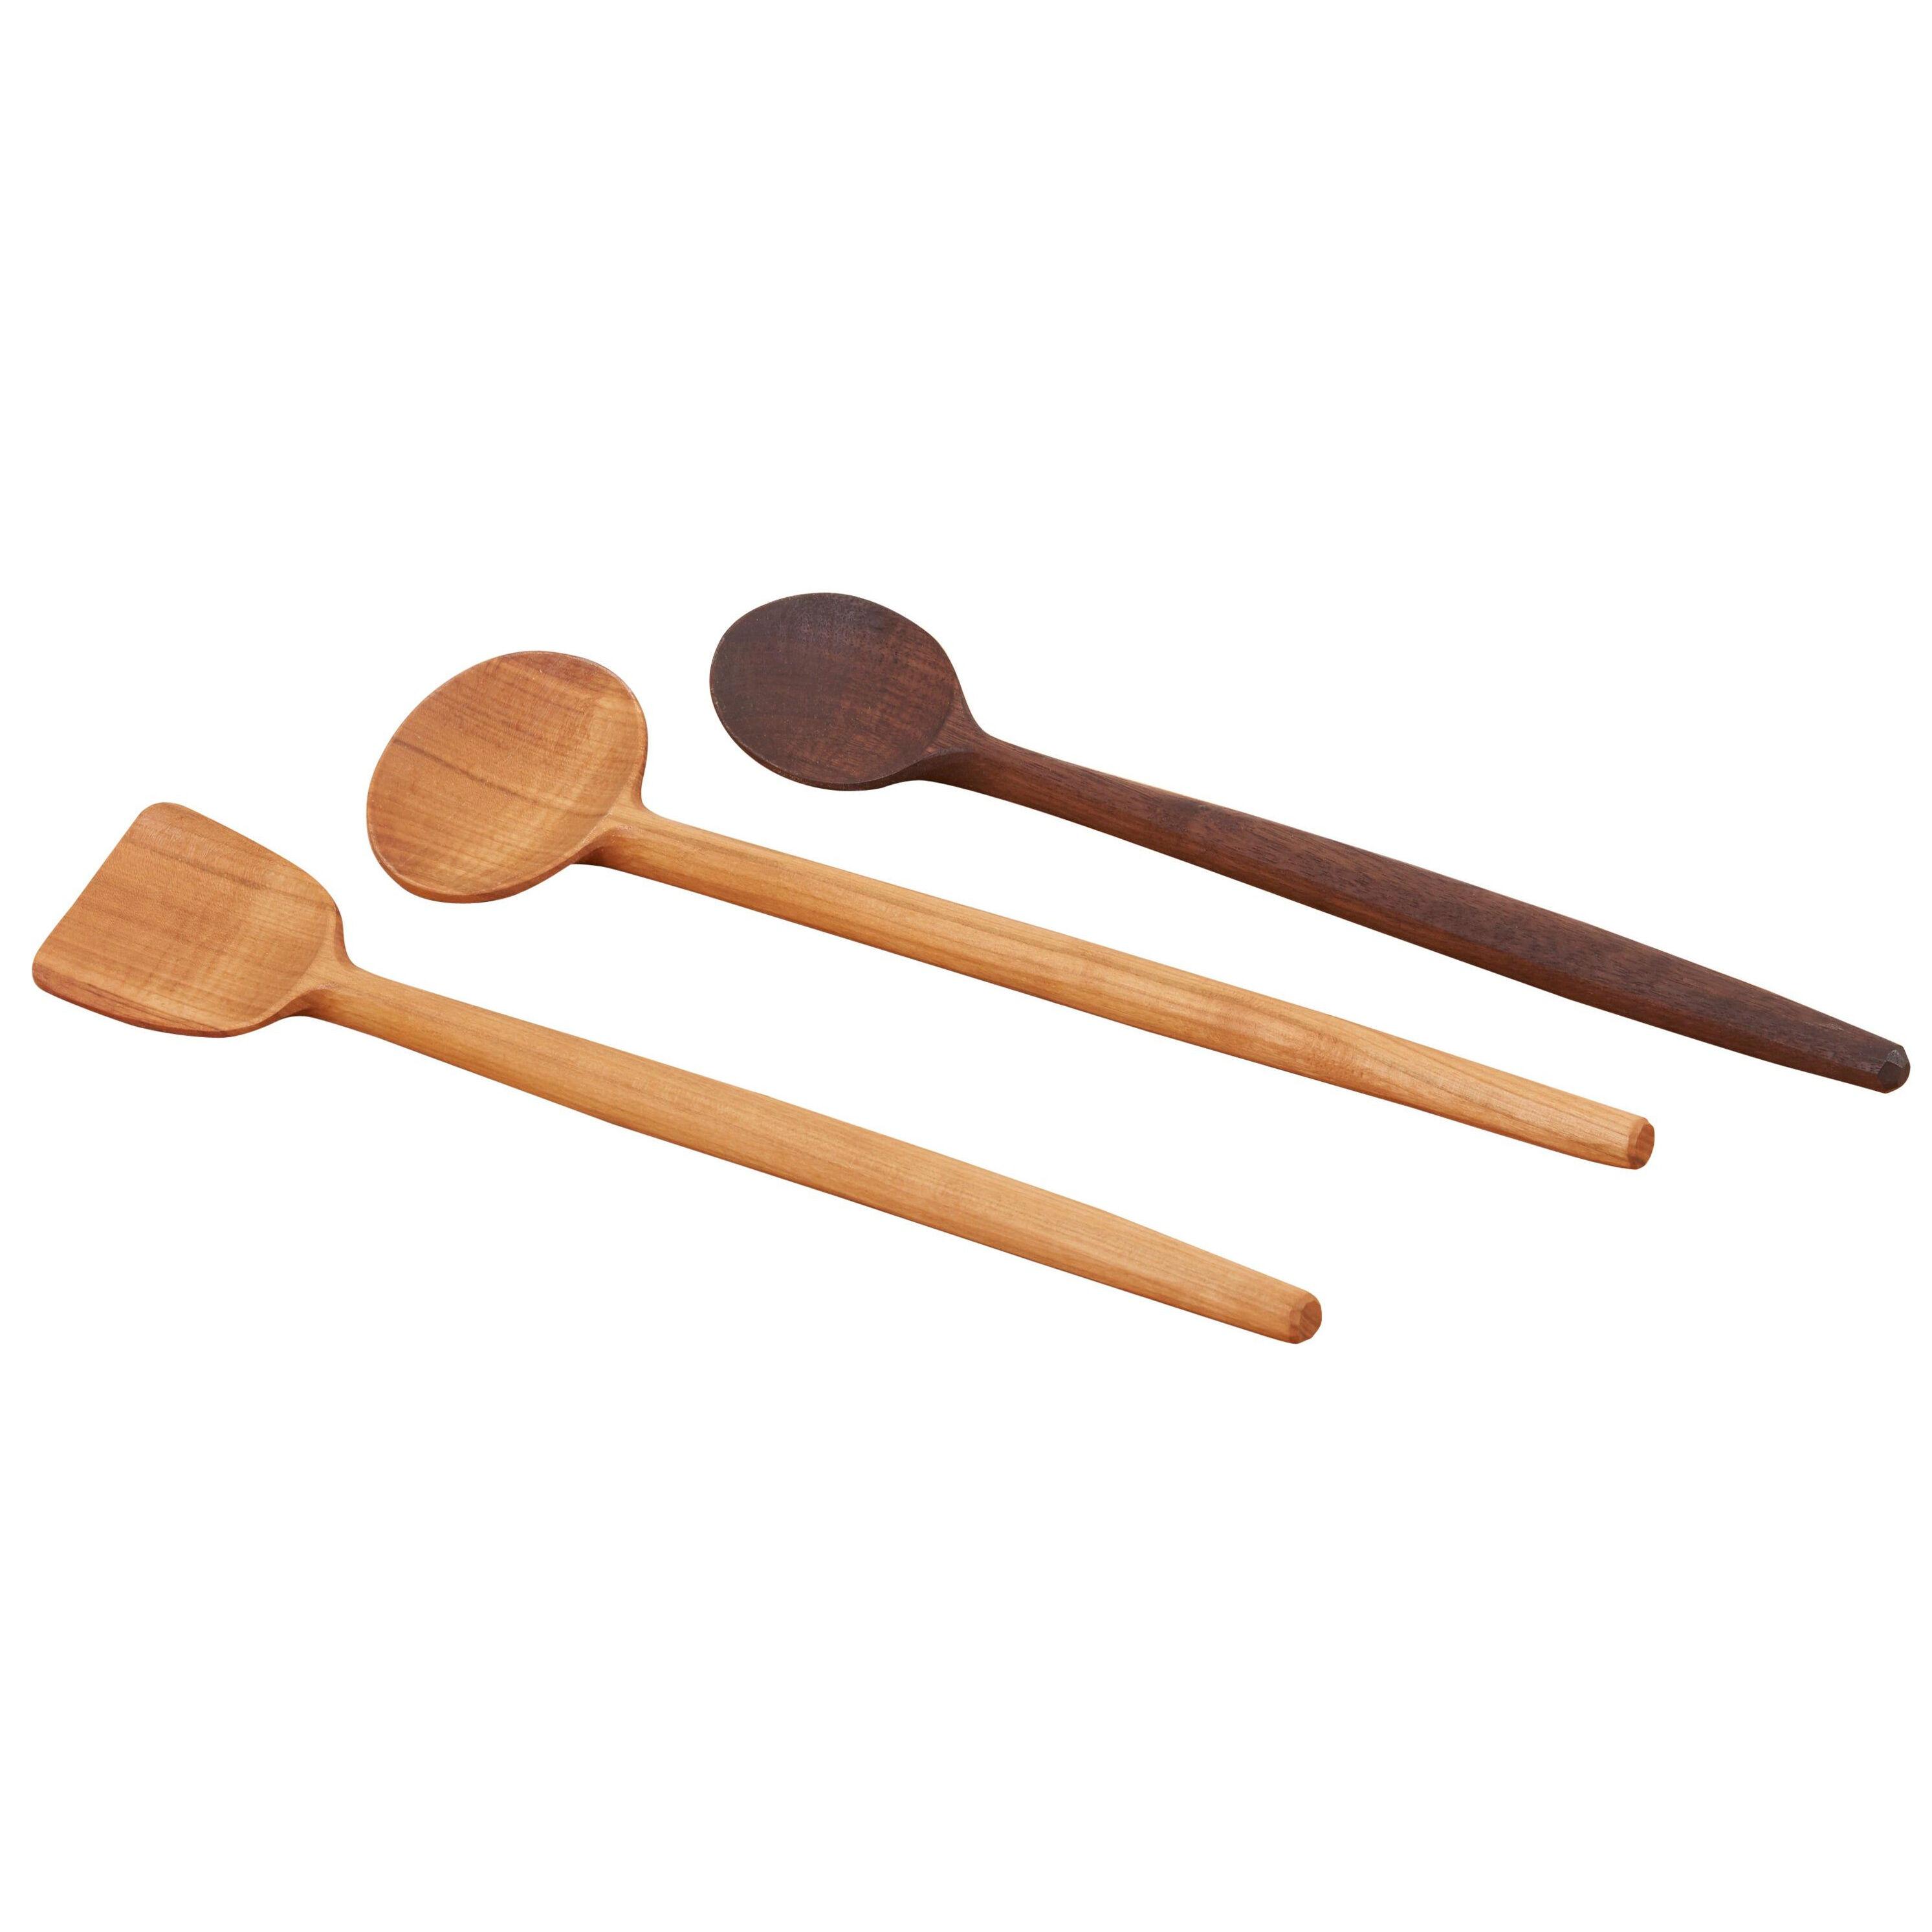 Set of 3 Wooden Spoons by Fabian Fischer, Germany, 2020